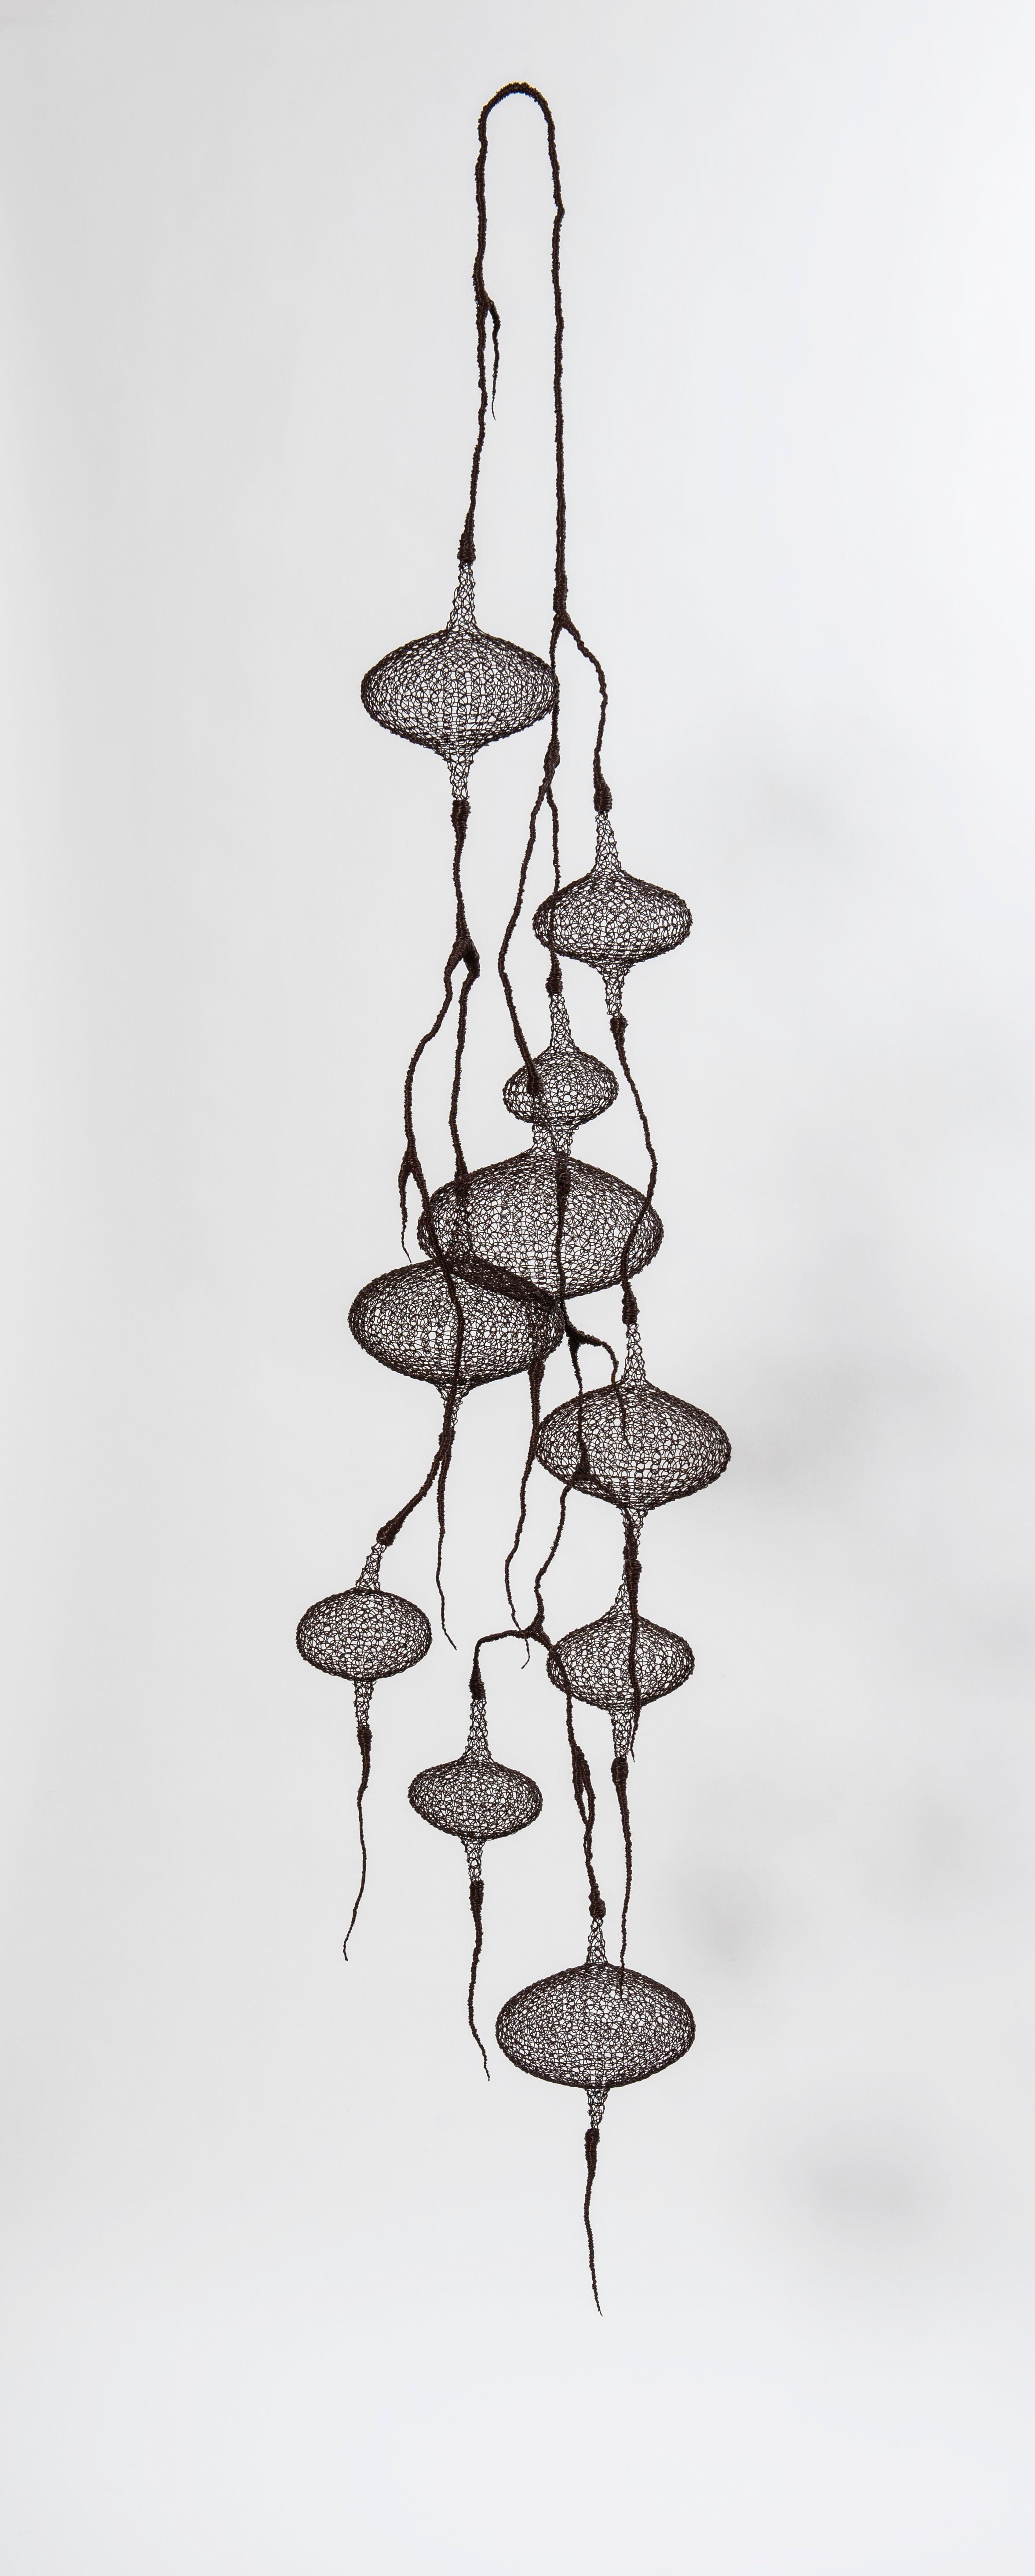 Delphine Grandvaux Abstract Sculpture - "Waterfall I ", Hand-Knitted Airy Transparent Pendant Metallic Wire Sculpture